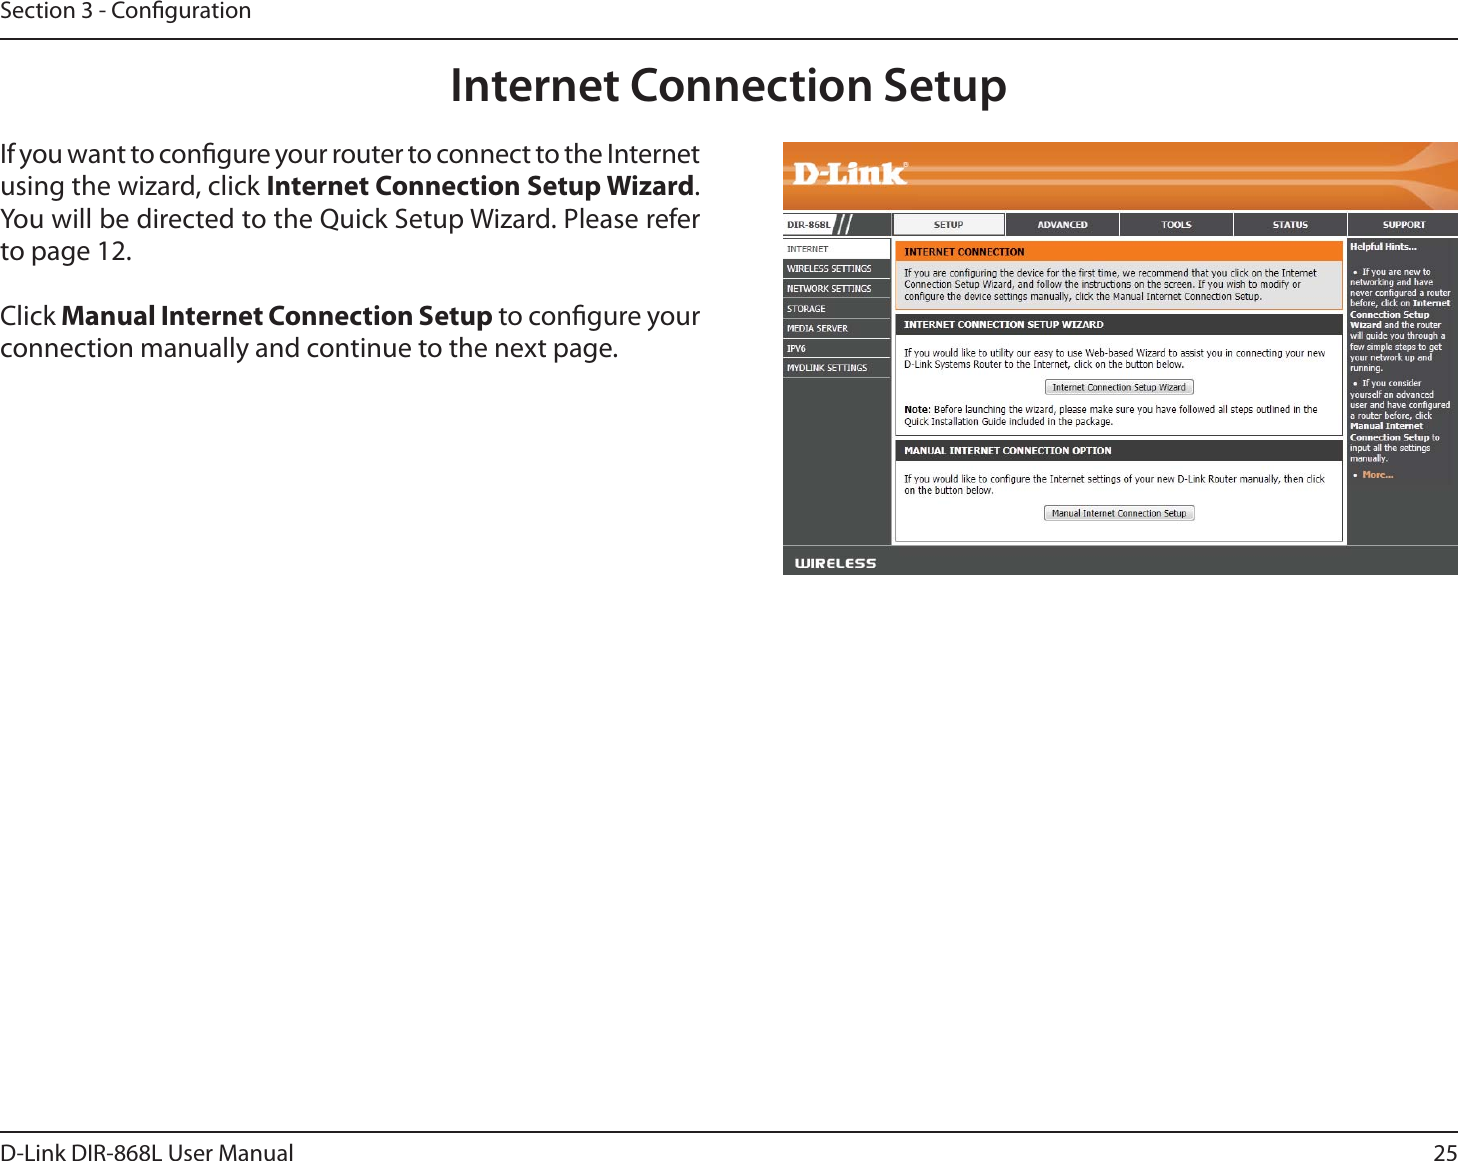 25D-Link DIR-868L User ManualSection 3 - CongurationInternet Connection SetupIf you want to congure your router to connect to the Internet using the wizard, click Internet Connection Setup Wizard. You will be directed to the Quick Setup Wizard. Please refer to page 12.Click Manual Internet Connection Setup to congure your connection manually and continue to the next page.